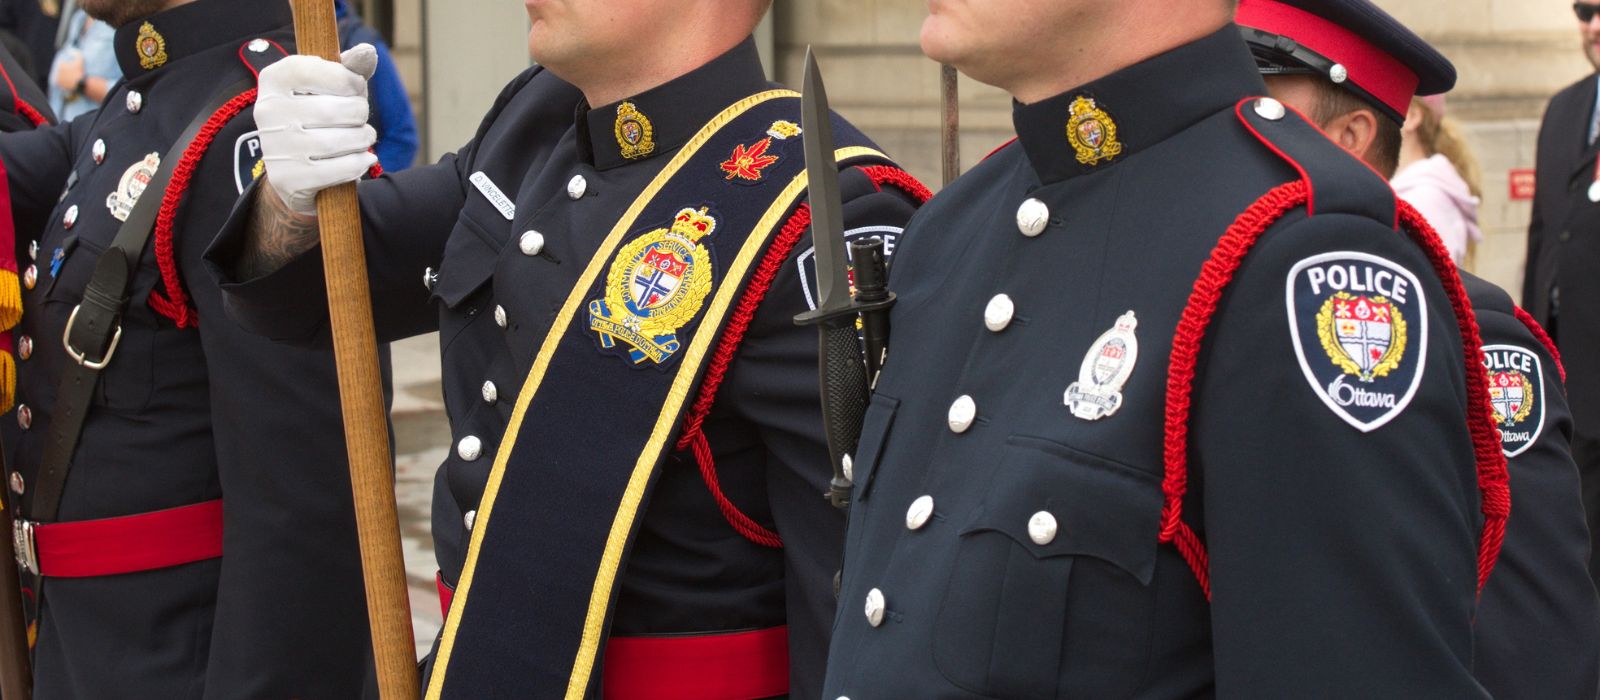 Members of the Ottawa Police Ceremonial Guard standing at attention.